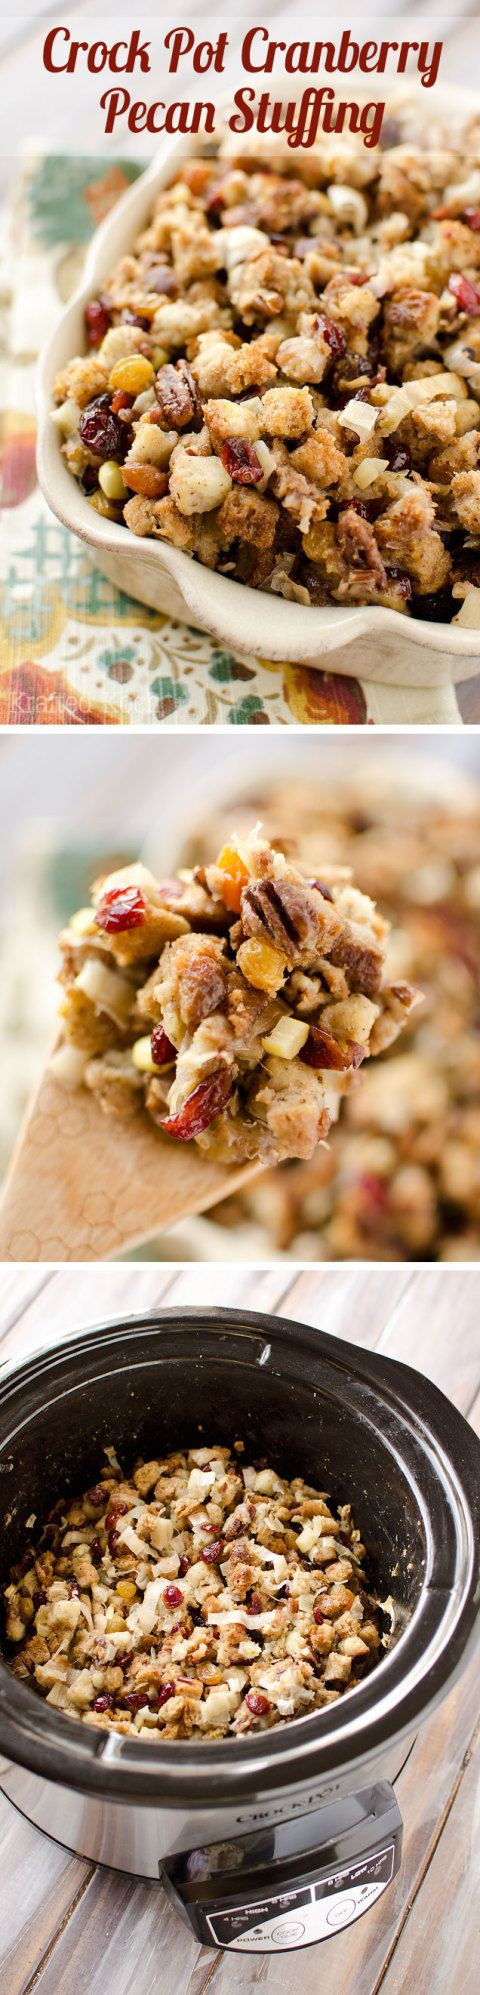 Slow Cooker Side Dishes For Thanksgiving
 Crock Pot Cranberry Pecan Stuffing